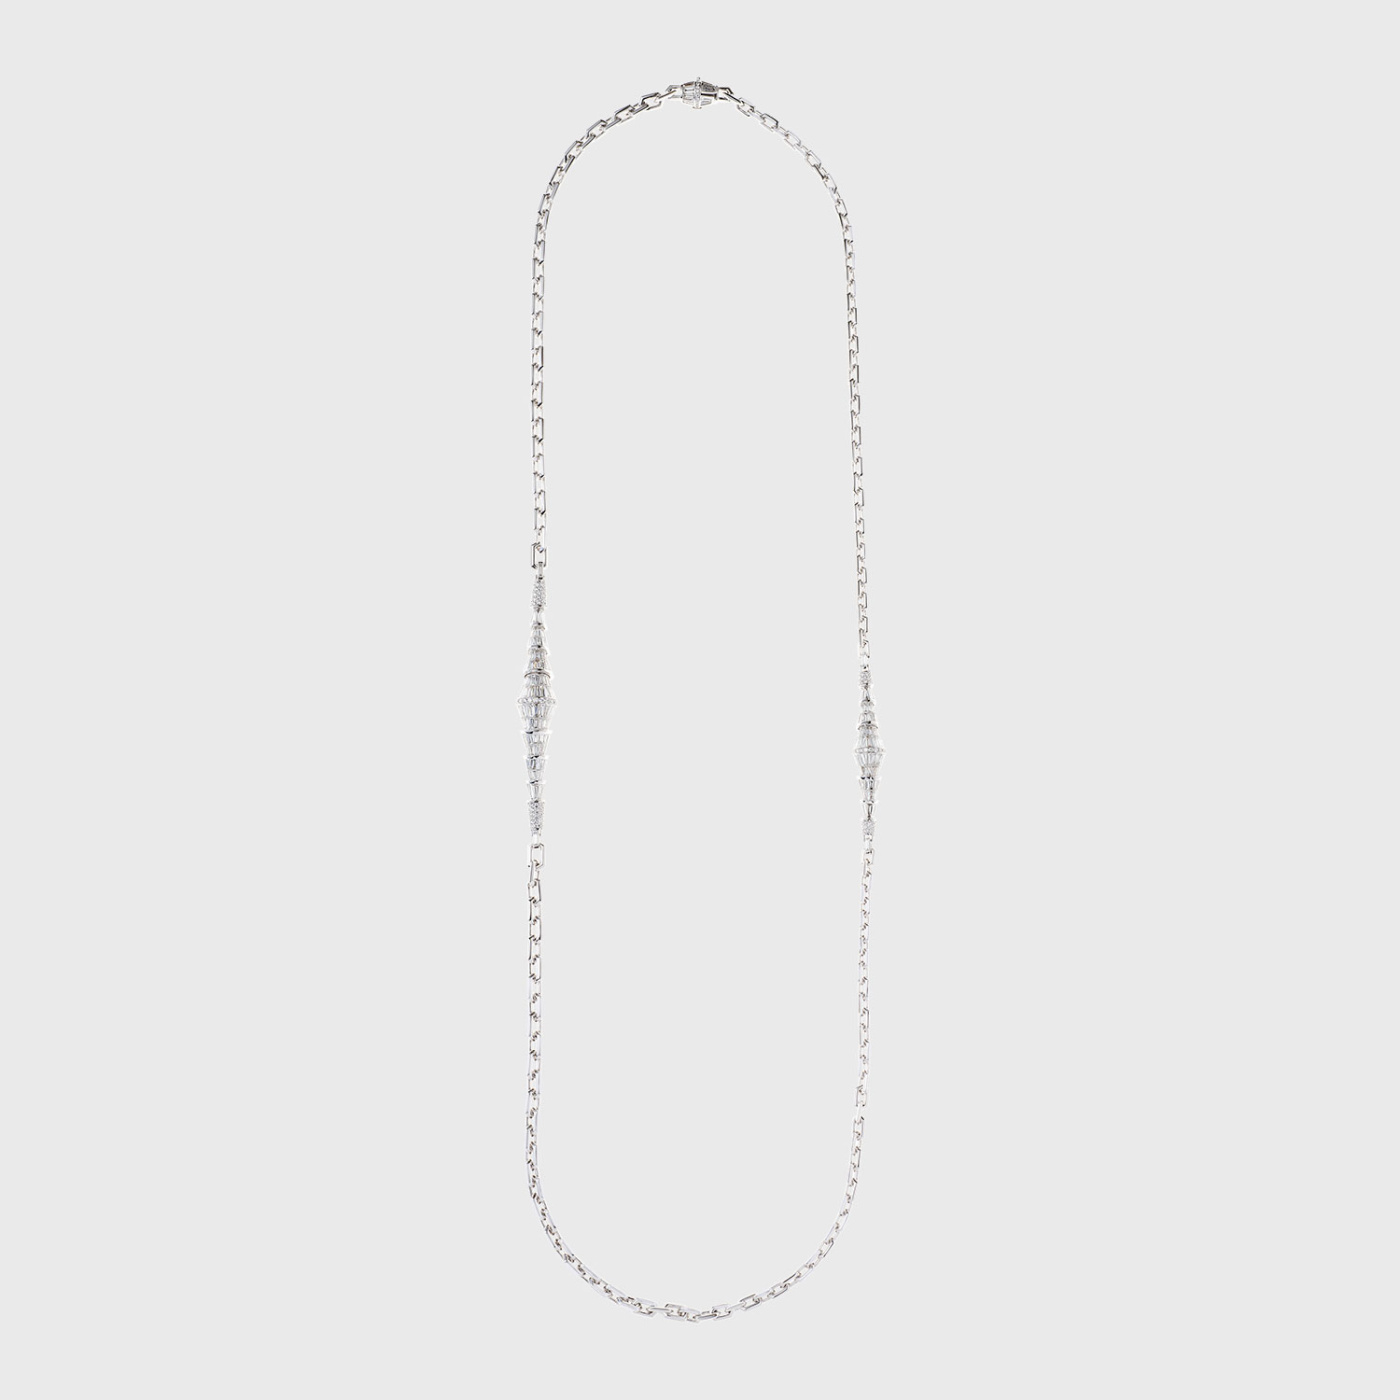 White gold long chain necklace with white diamond baguettes